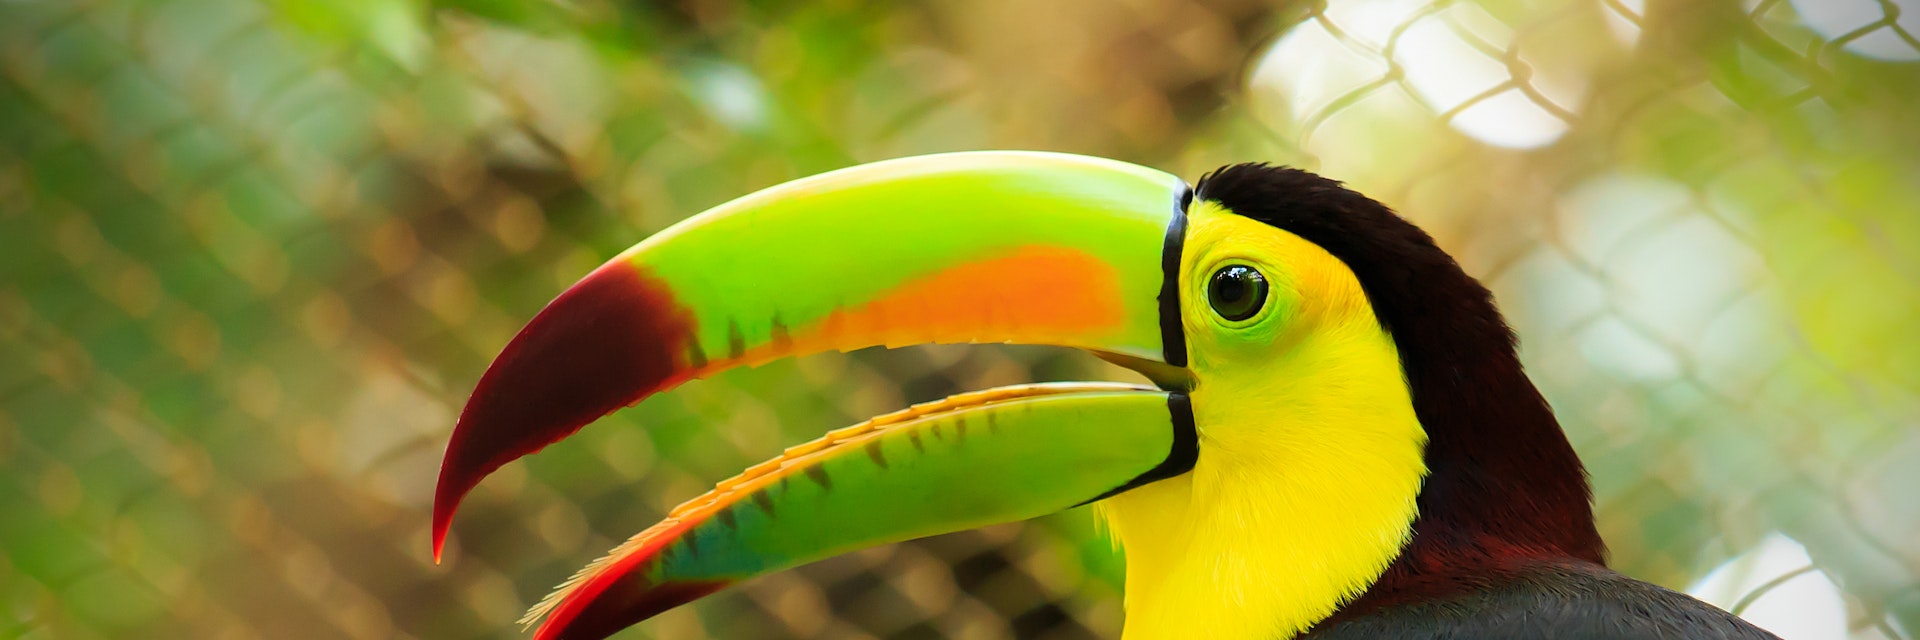 500px Photo ID: 107393487 - Closeup of colorful toucan bird somewhere in Mexico